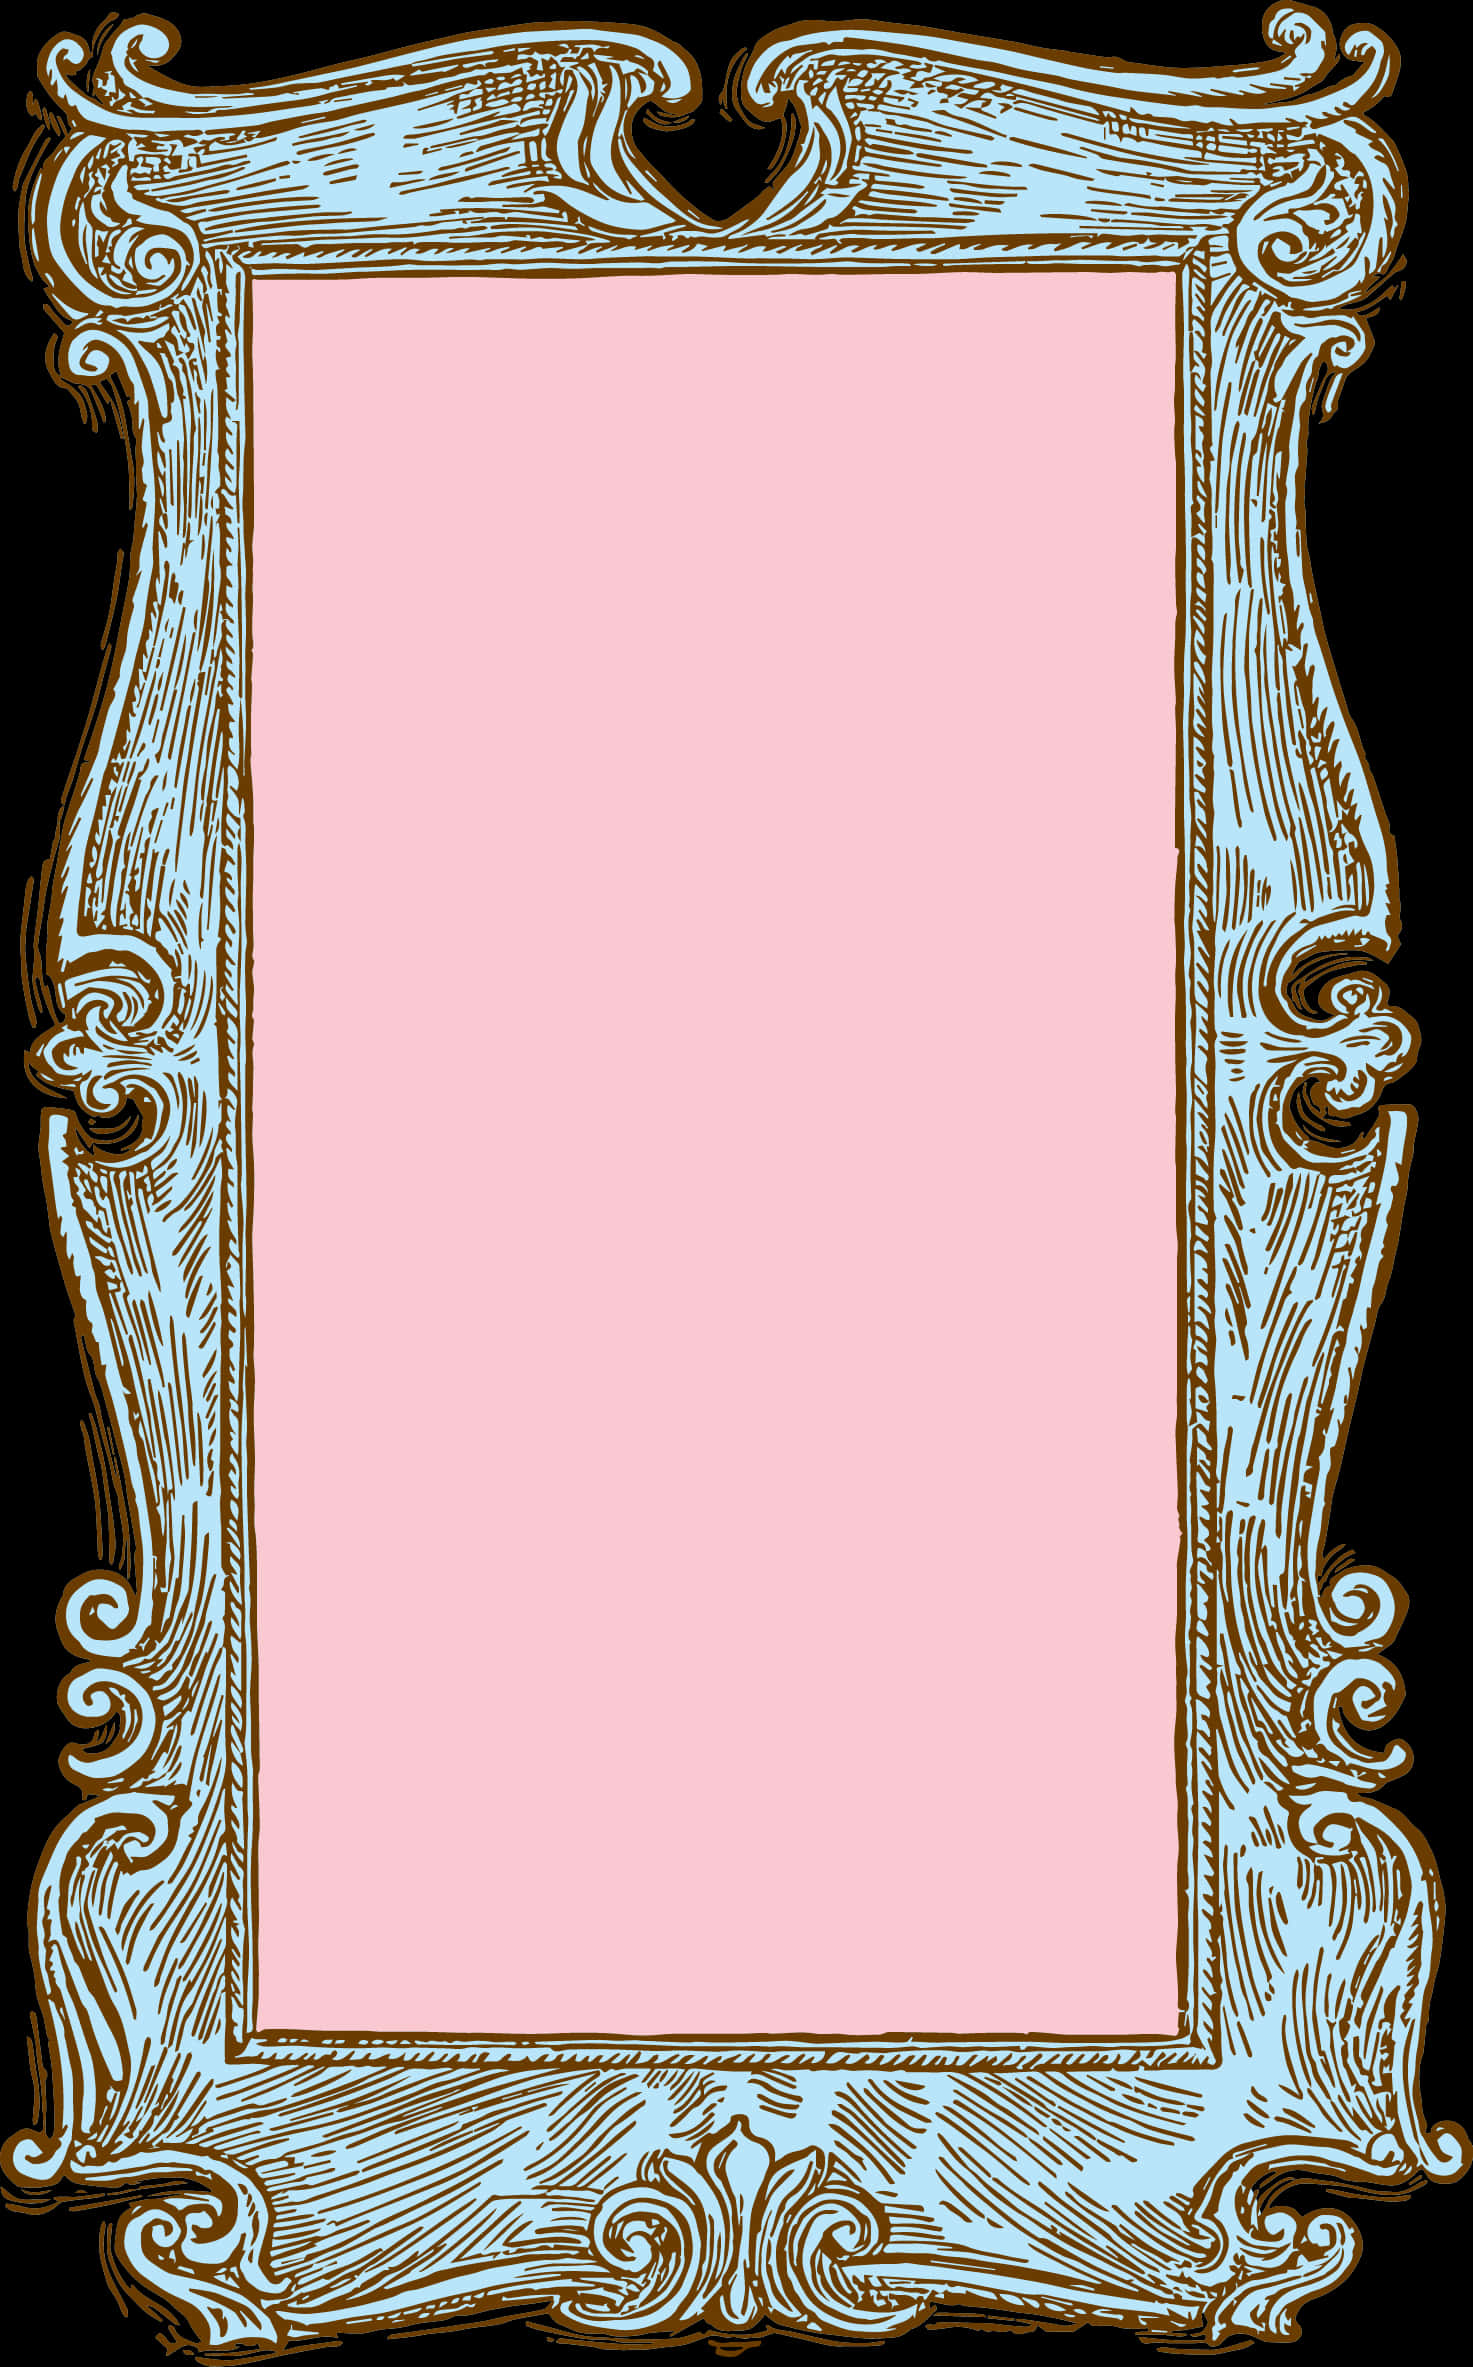 A Pink Rectangular Frame With Curly Edges